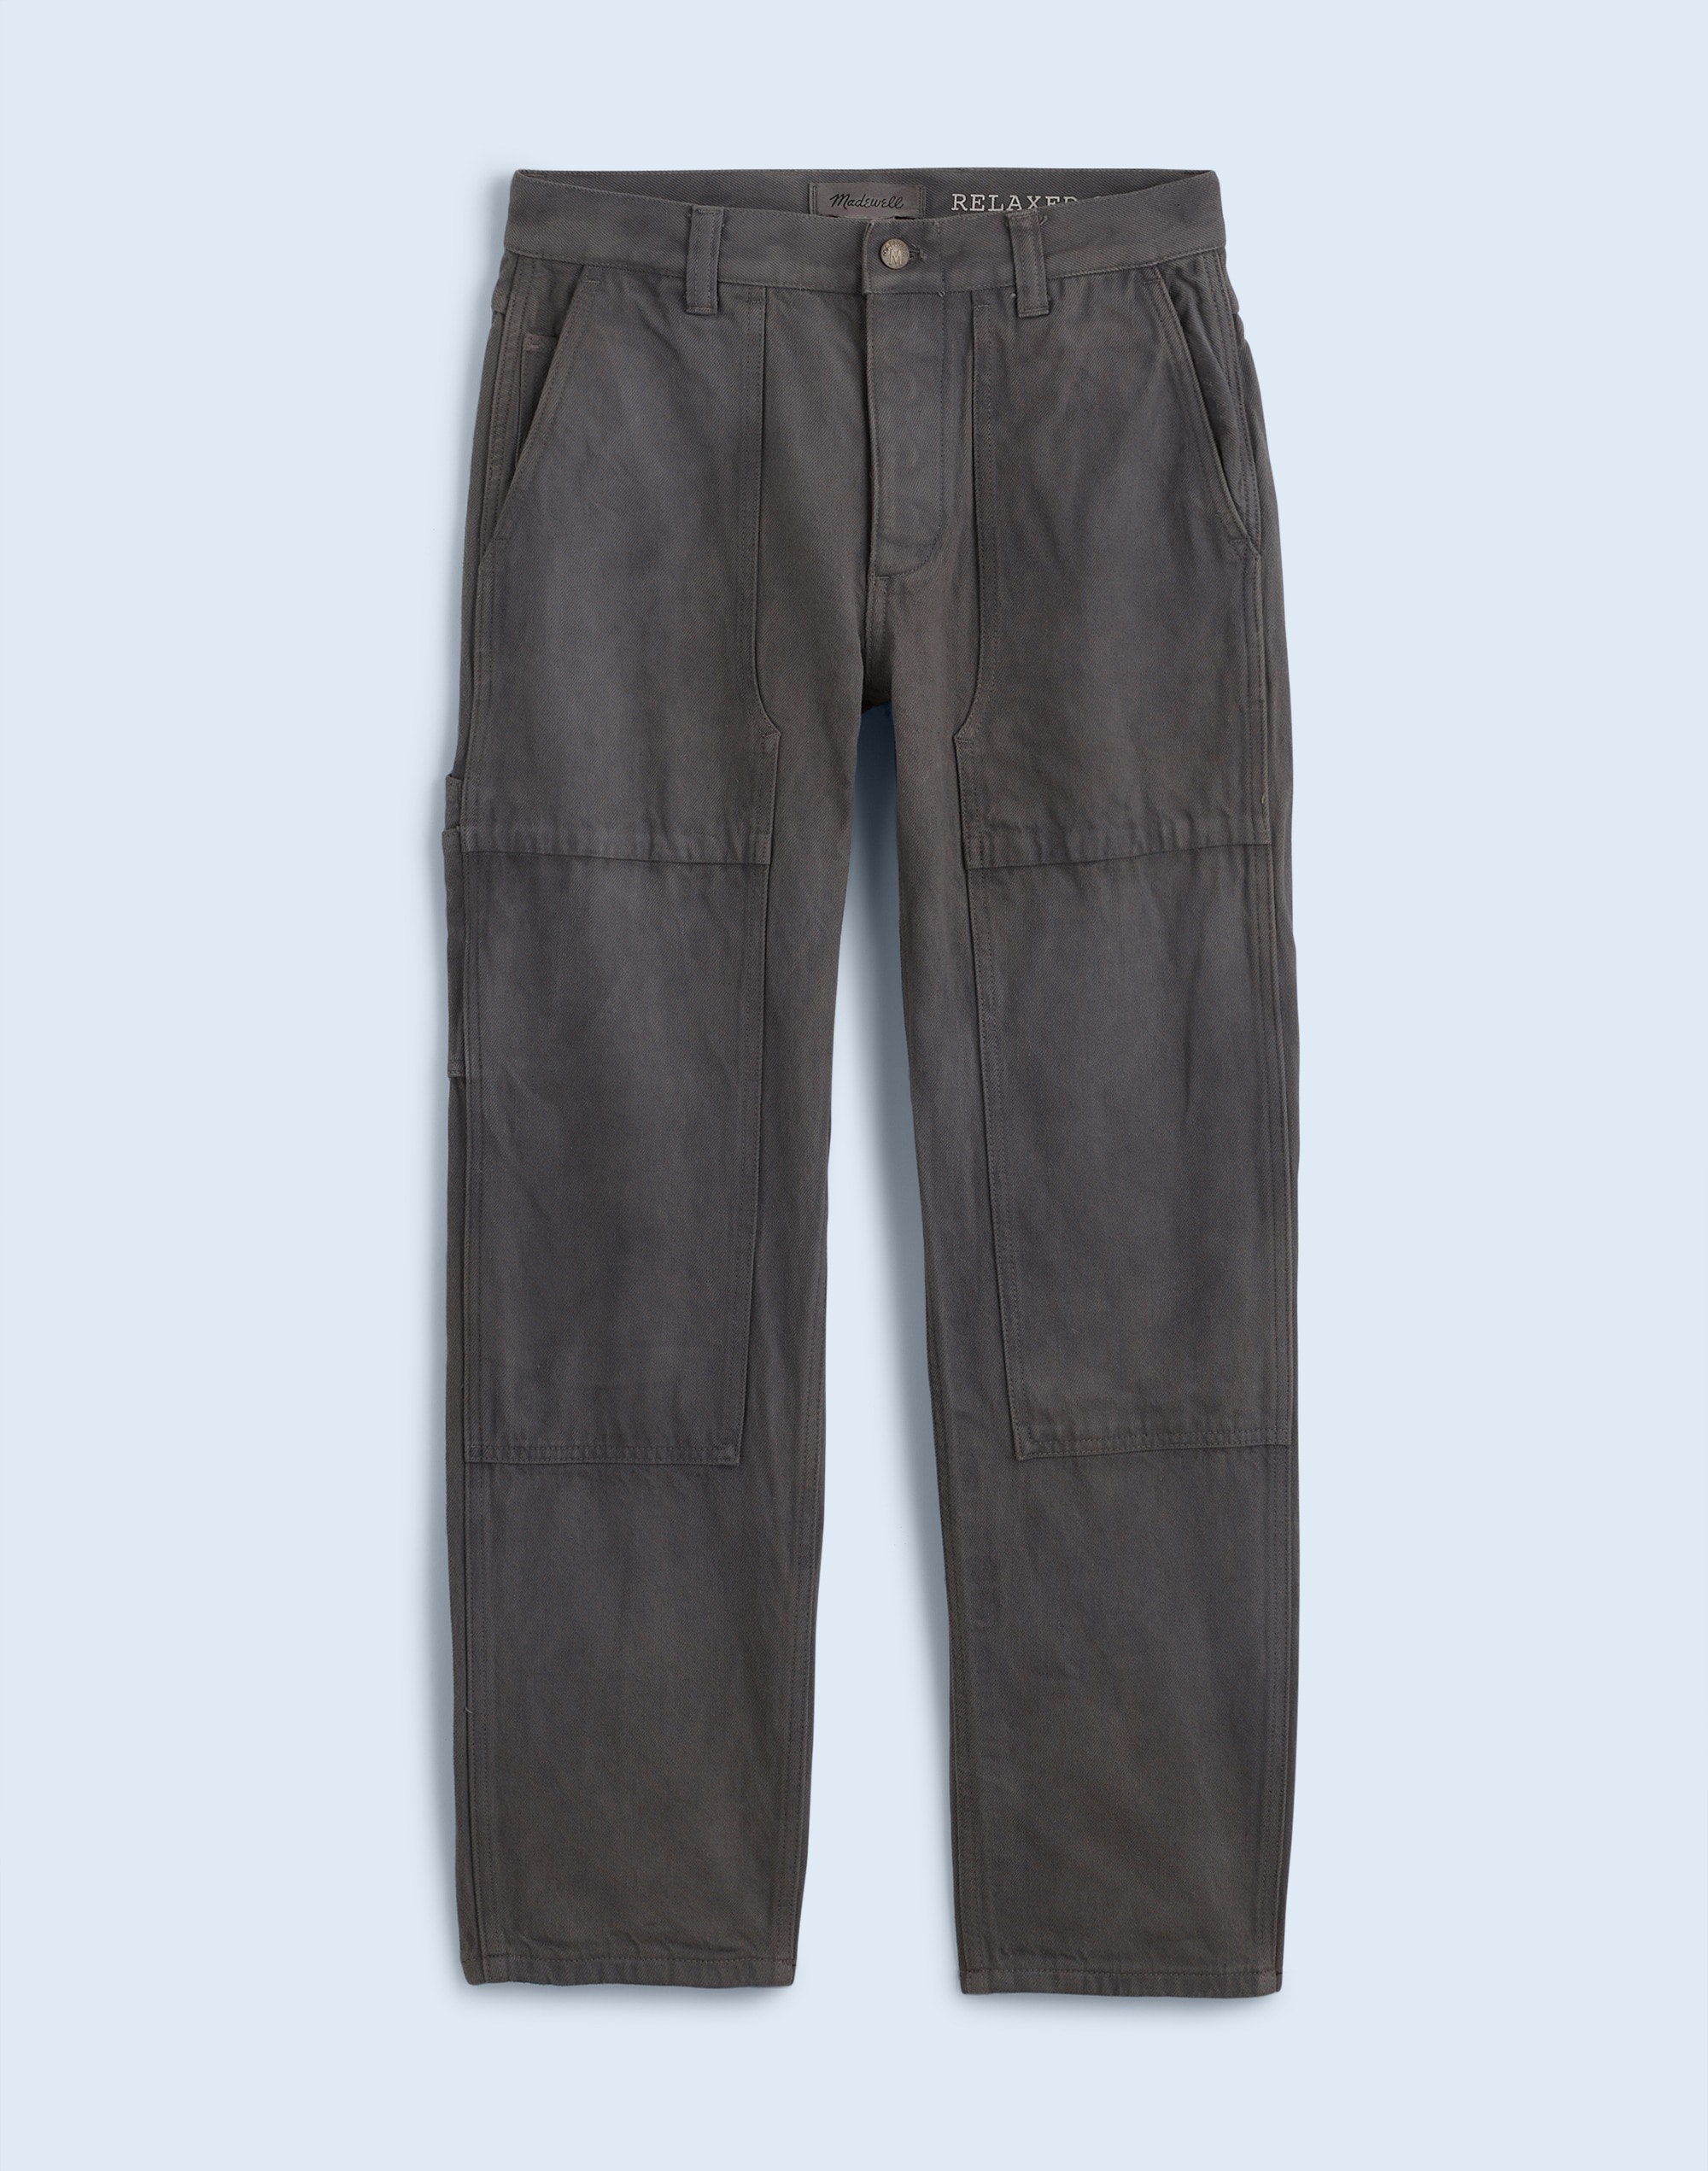 Madewell x MN Dye Studio Relaxed Straight Workwear Pant